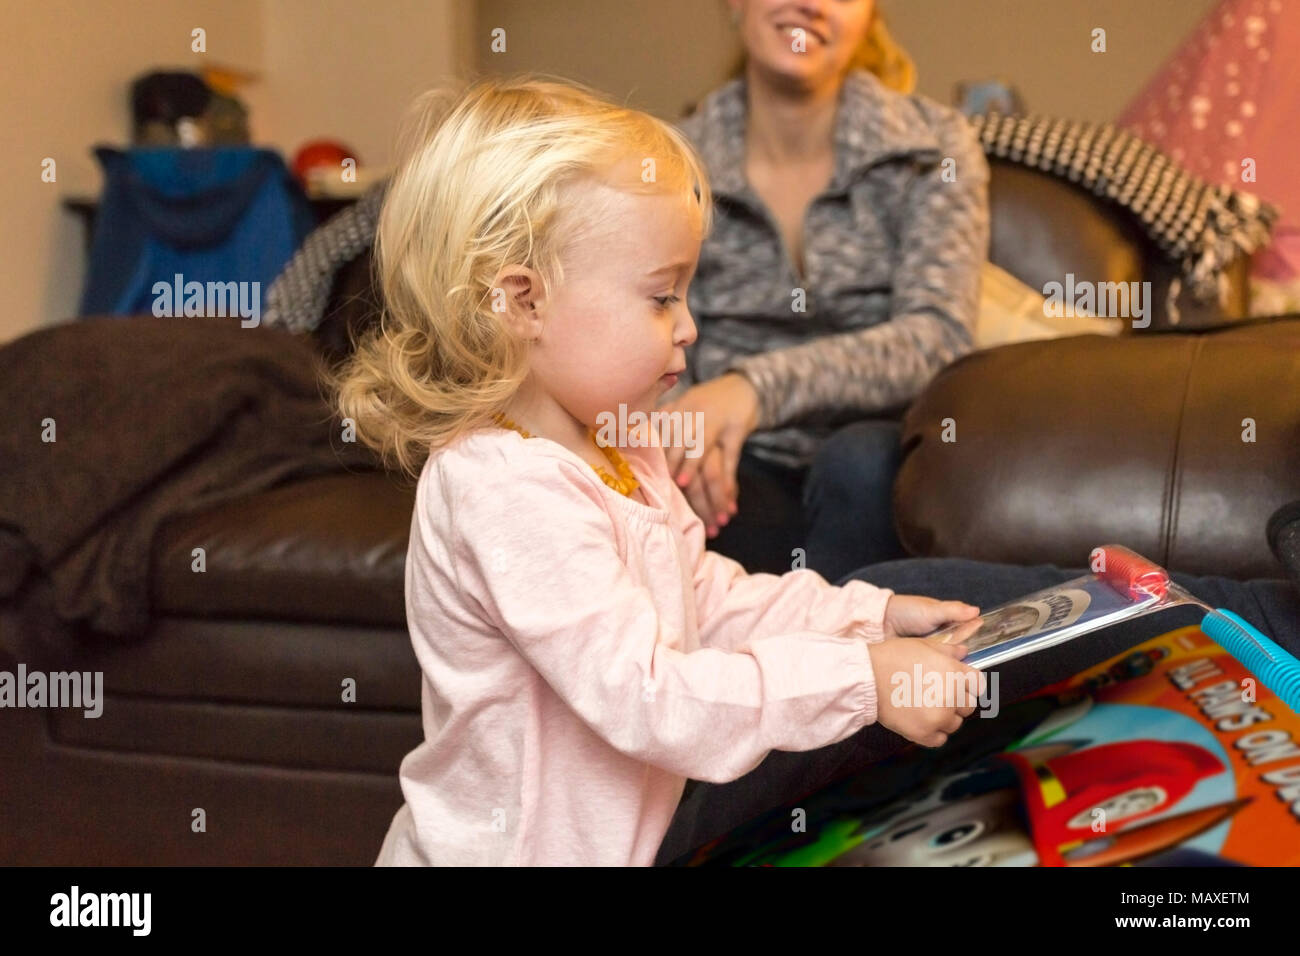 mother watching child playing with books on her birthday, Canada, Ontario Stock Photo